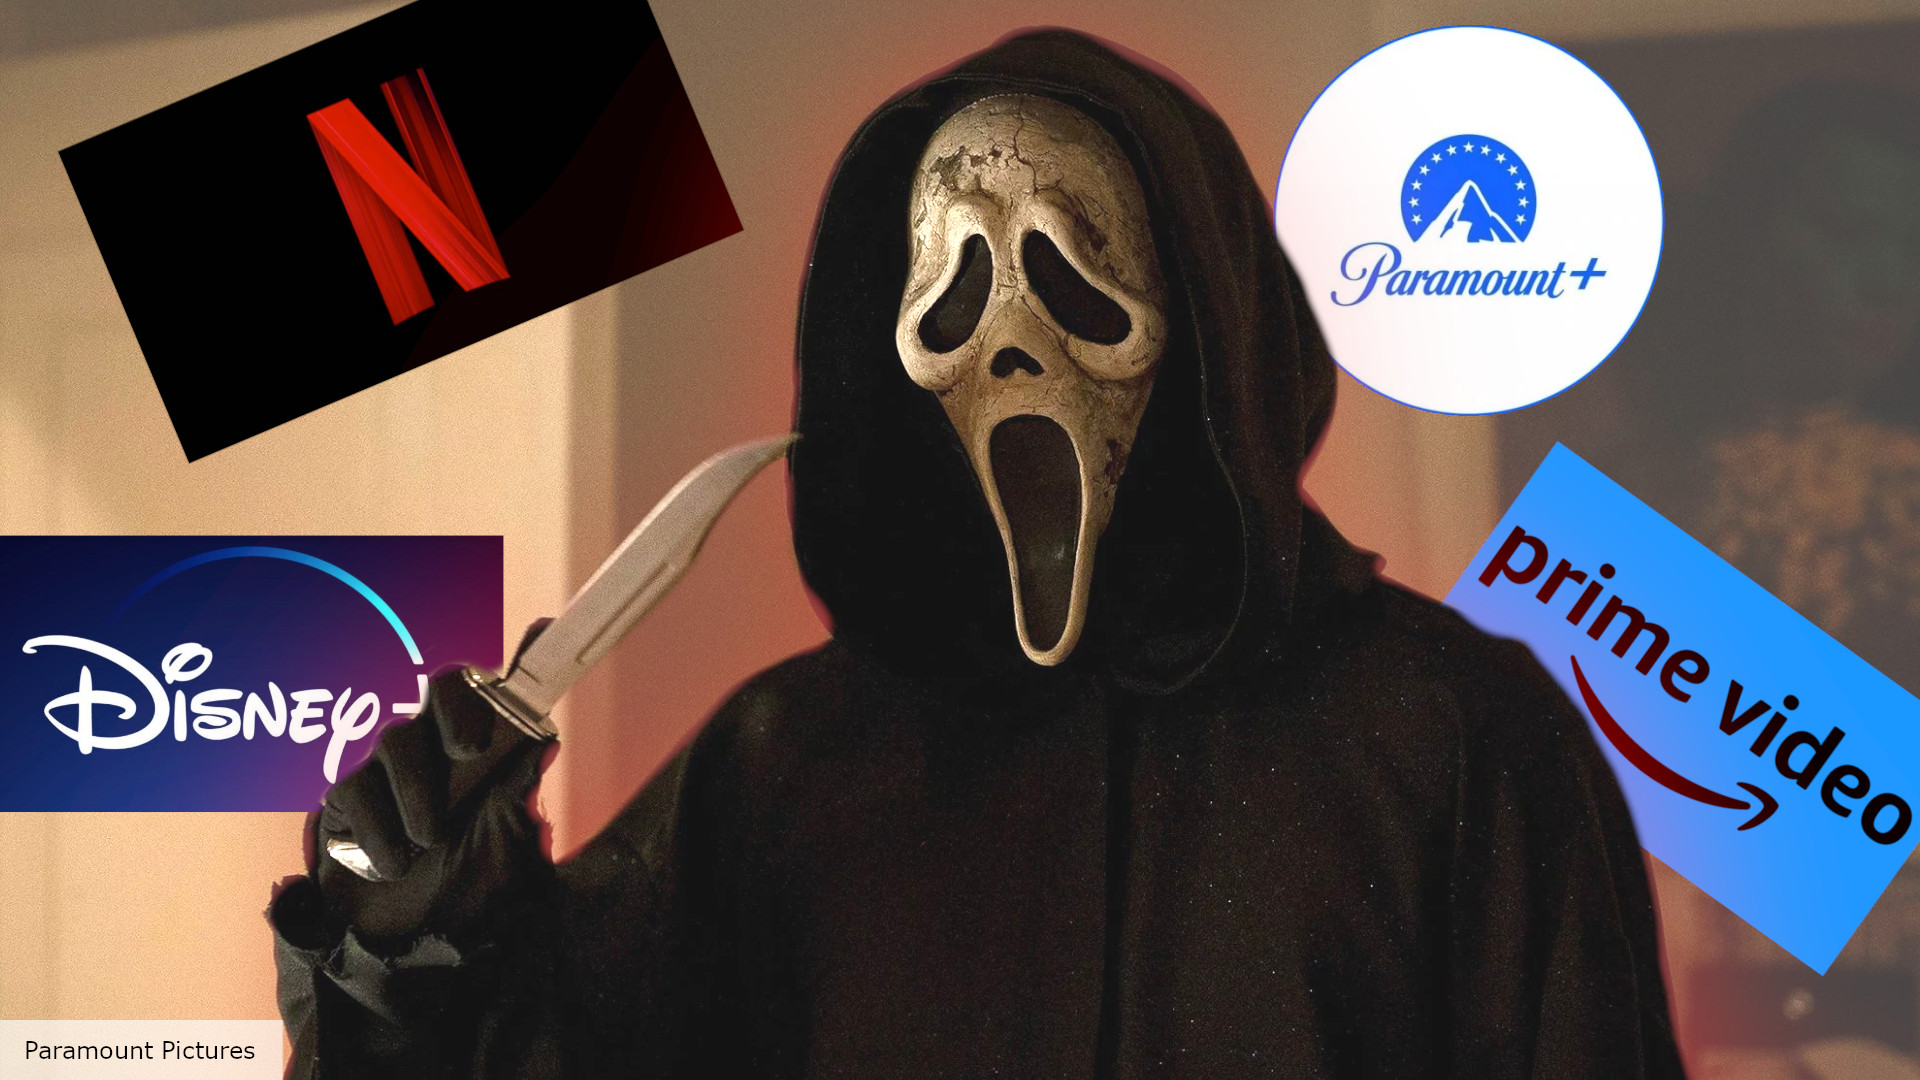 How to watch 'Scream VI' online for free with Paramount+